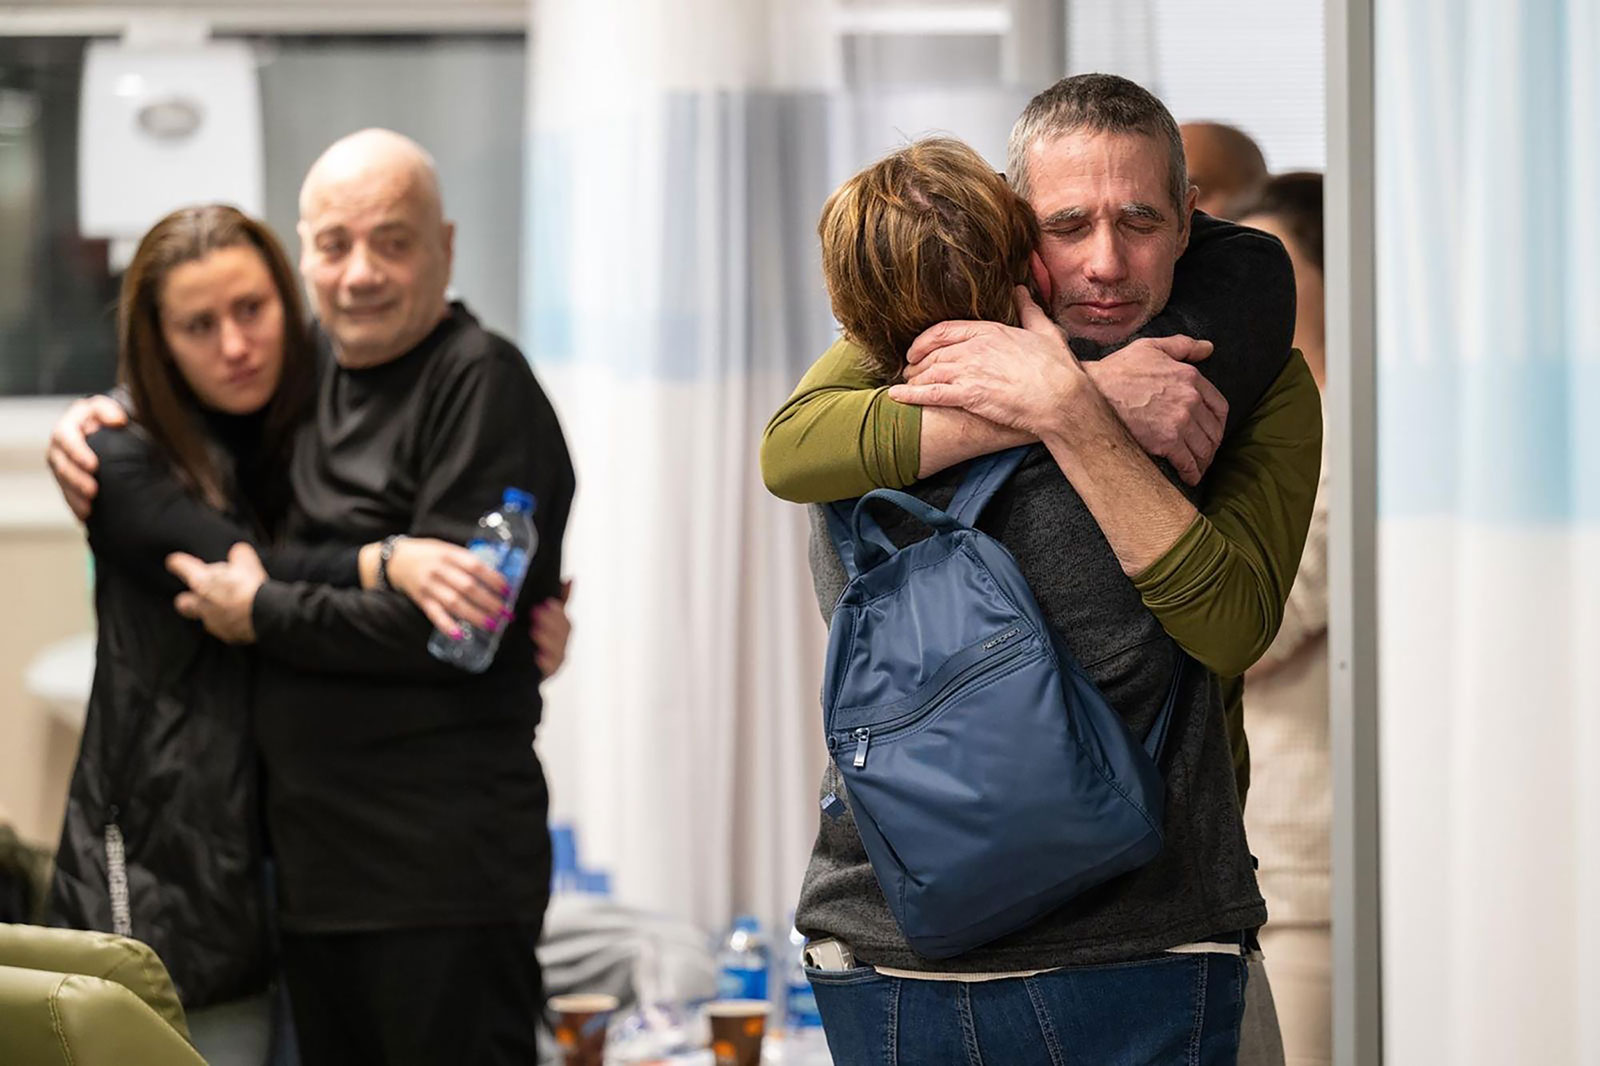 Fernando Simon Marman and Louis Har, two Israeli hostages who, according to the Israeli military, were freed in a special forces operation in Rafah, Gaza, reunite with loved ones at Sheba Medical Center, in Ramat Gan, Israel, on Tuesday, February 12.